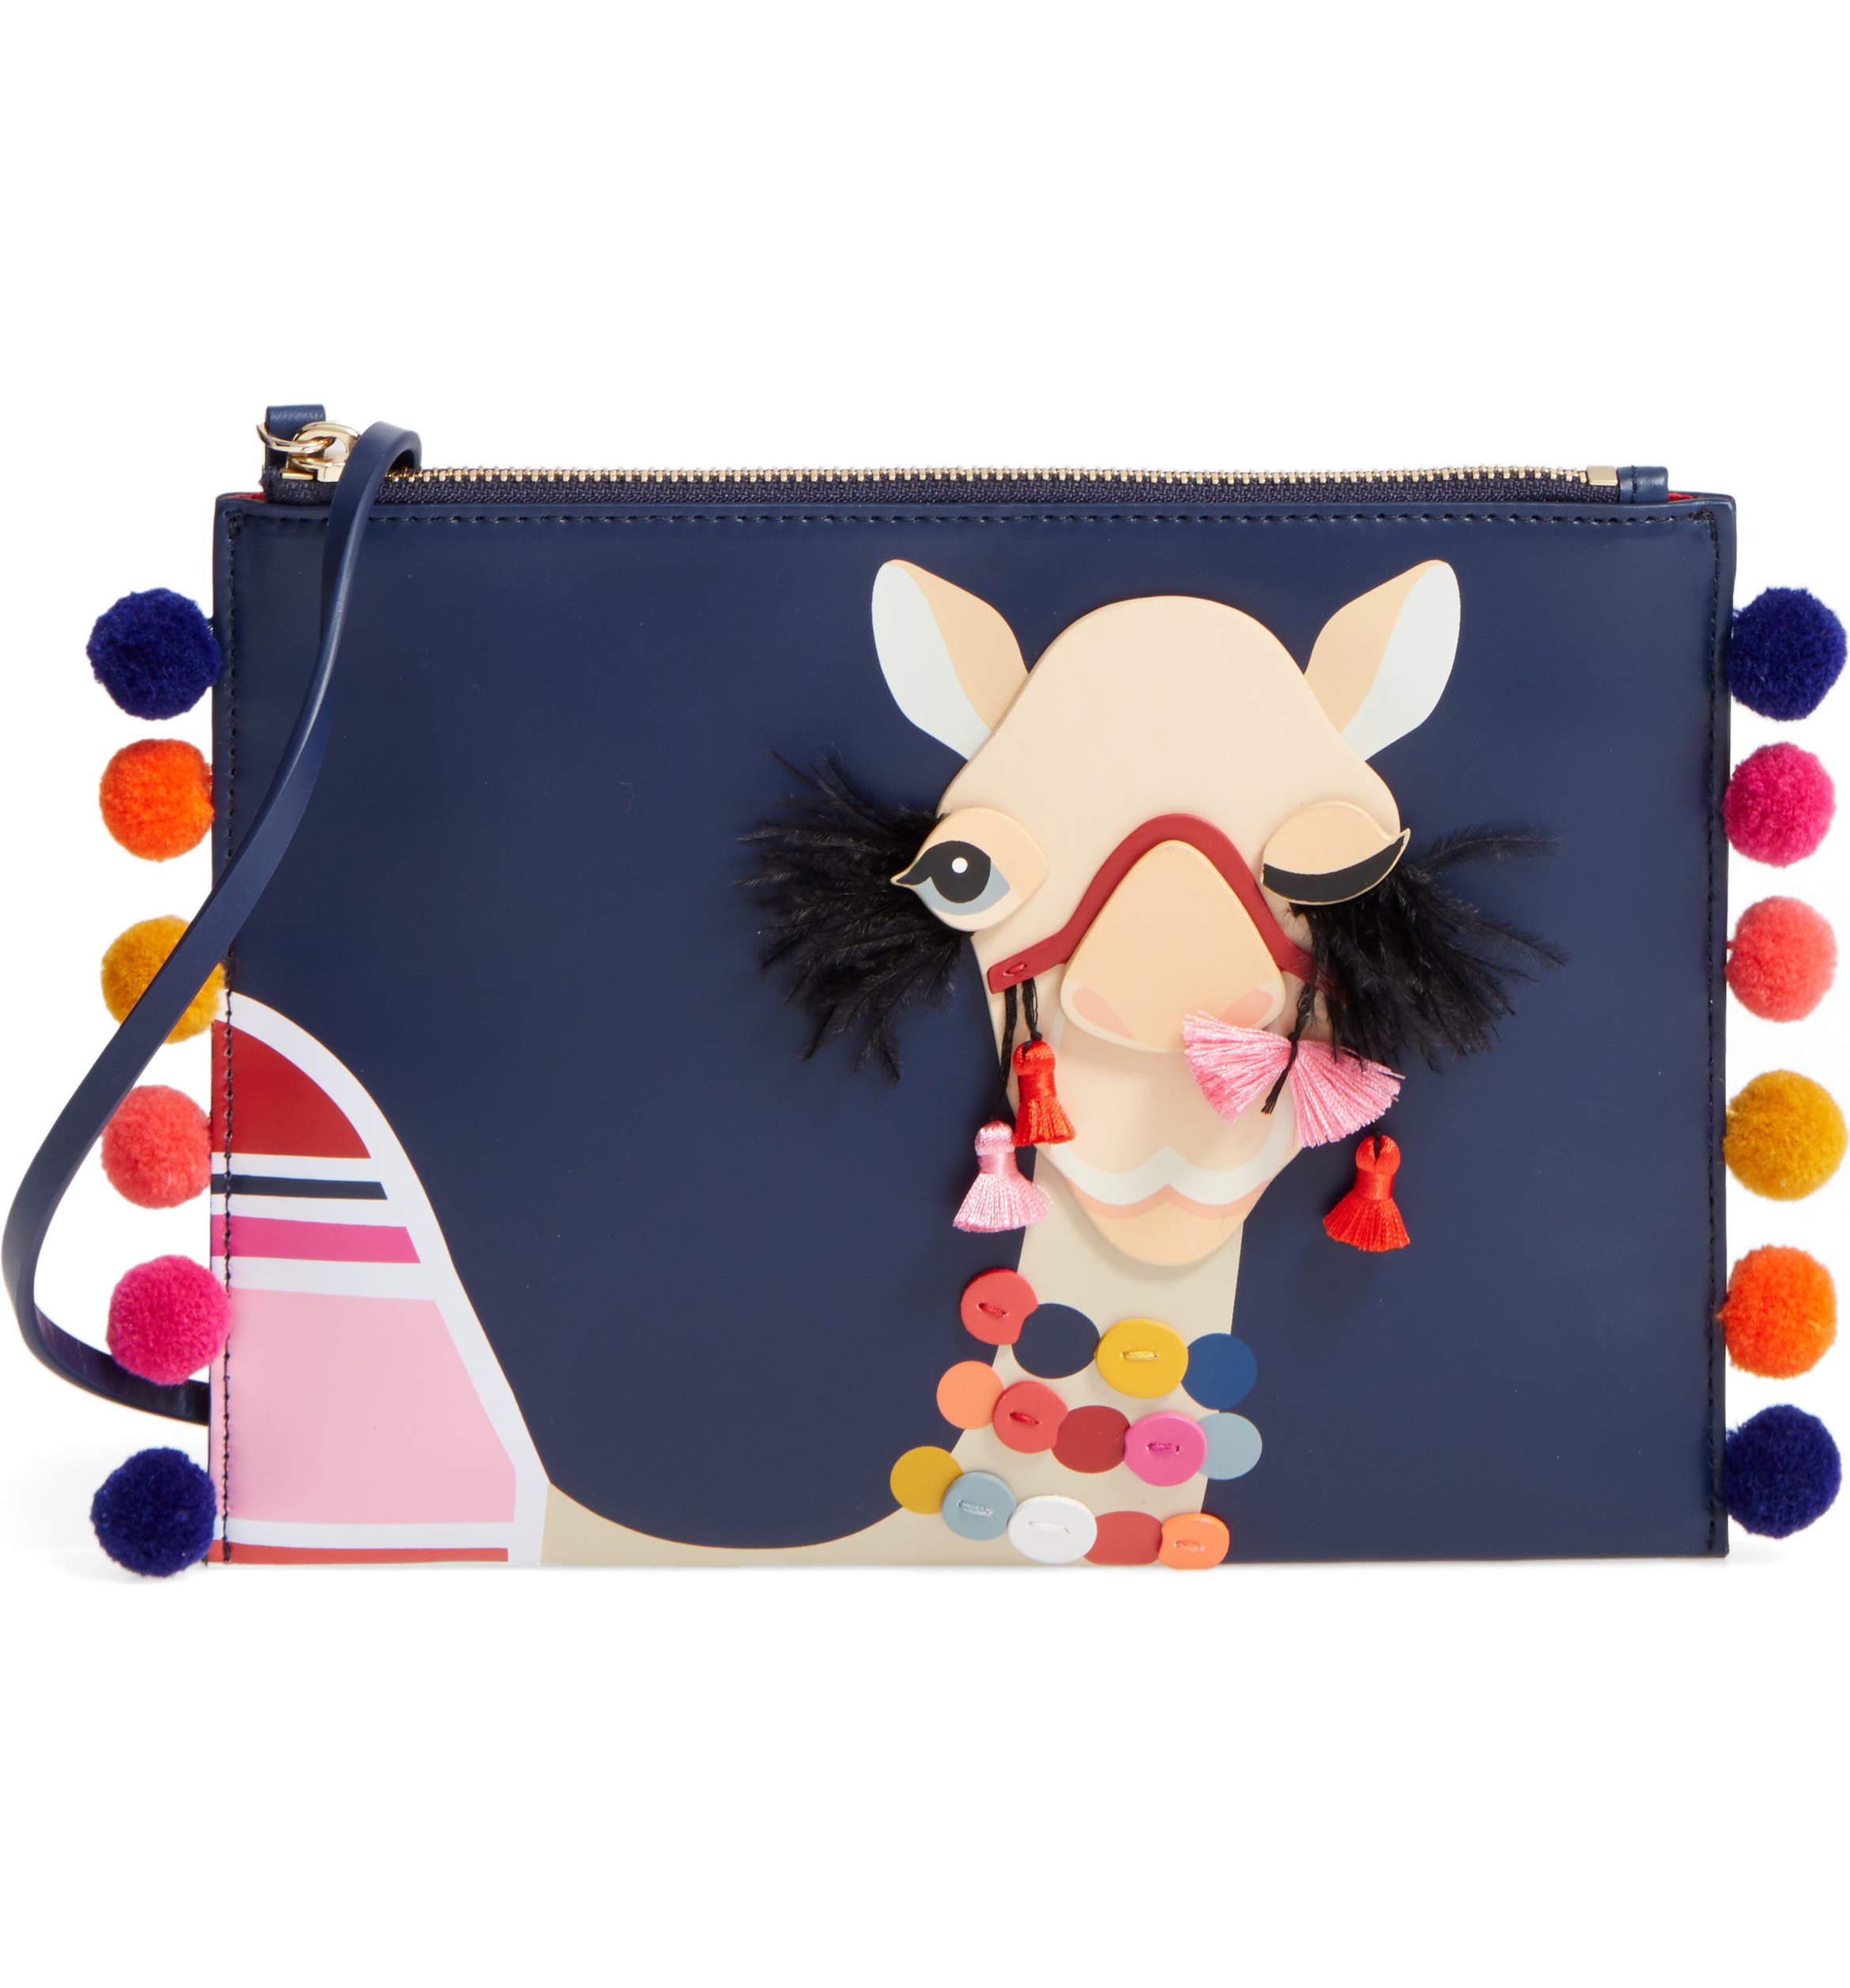 kate spade new york winking camel leather pouch | Nordstrom